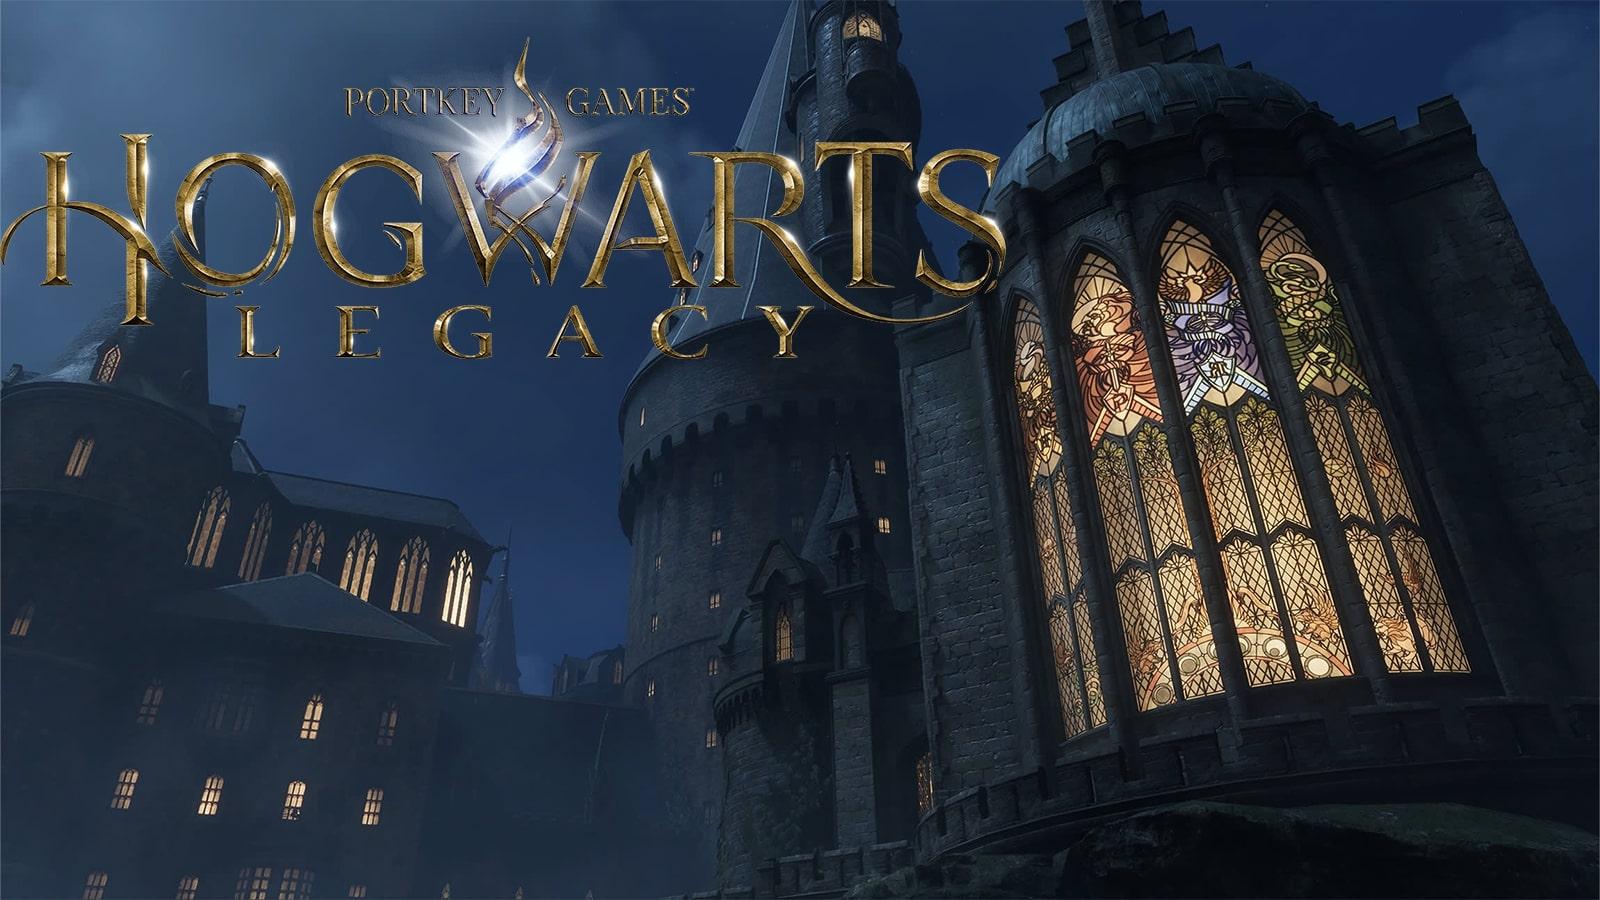 Hogwarts Legacy is Already the Biggest WB Games Launch on Steam